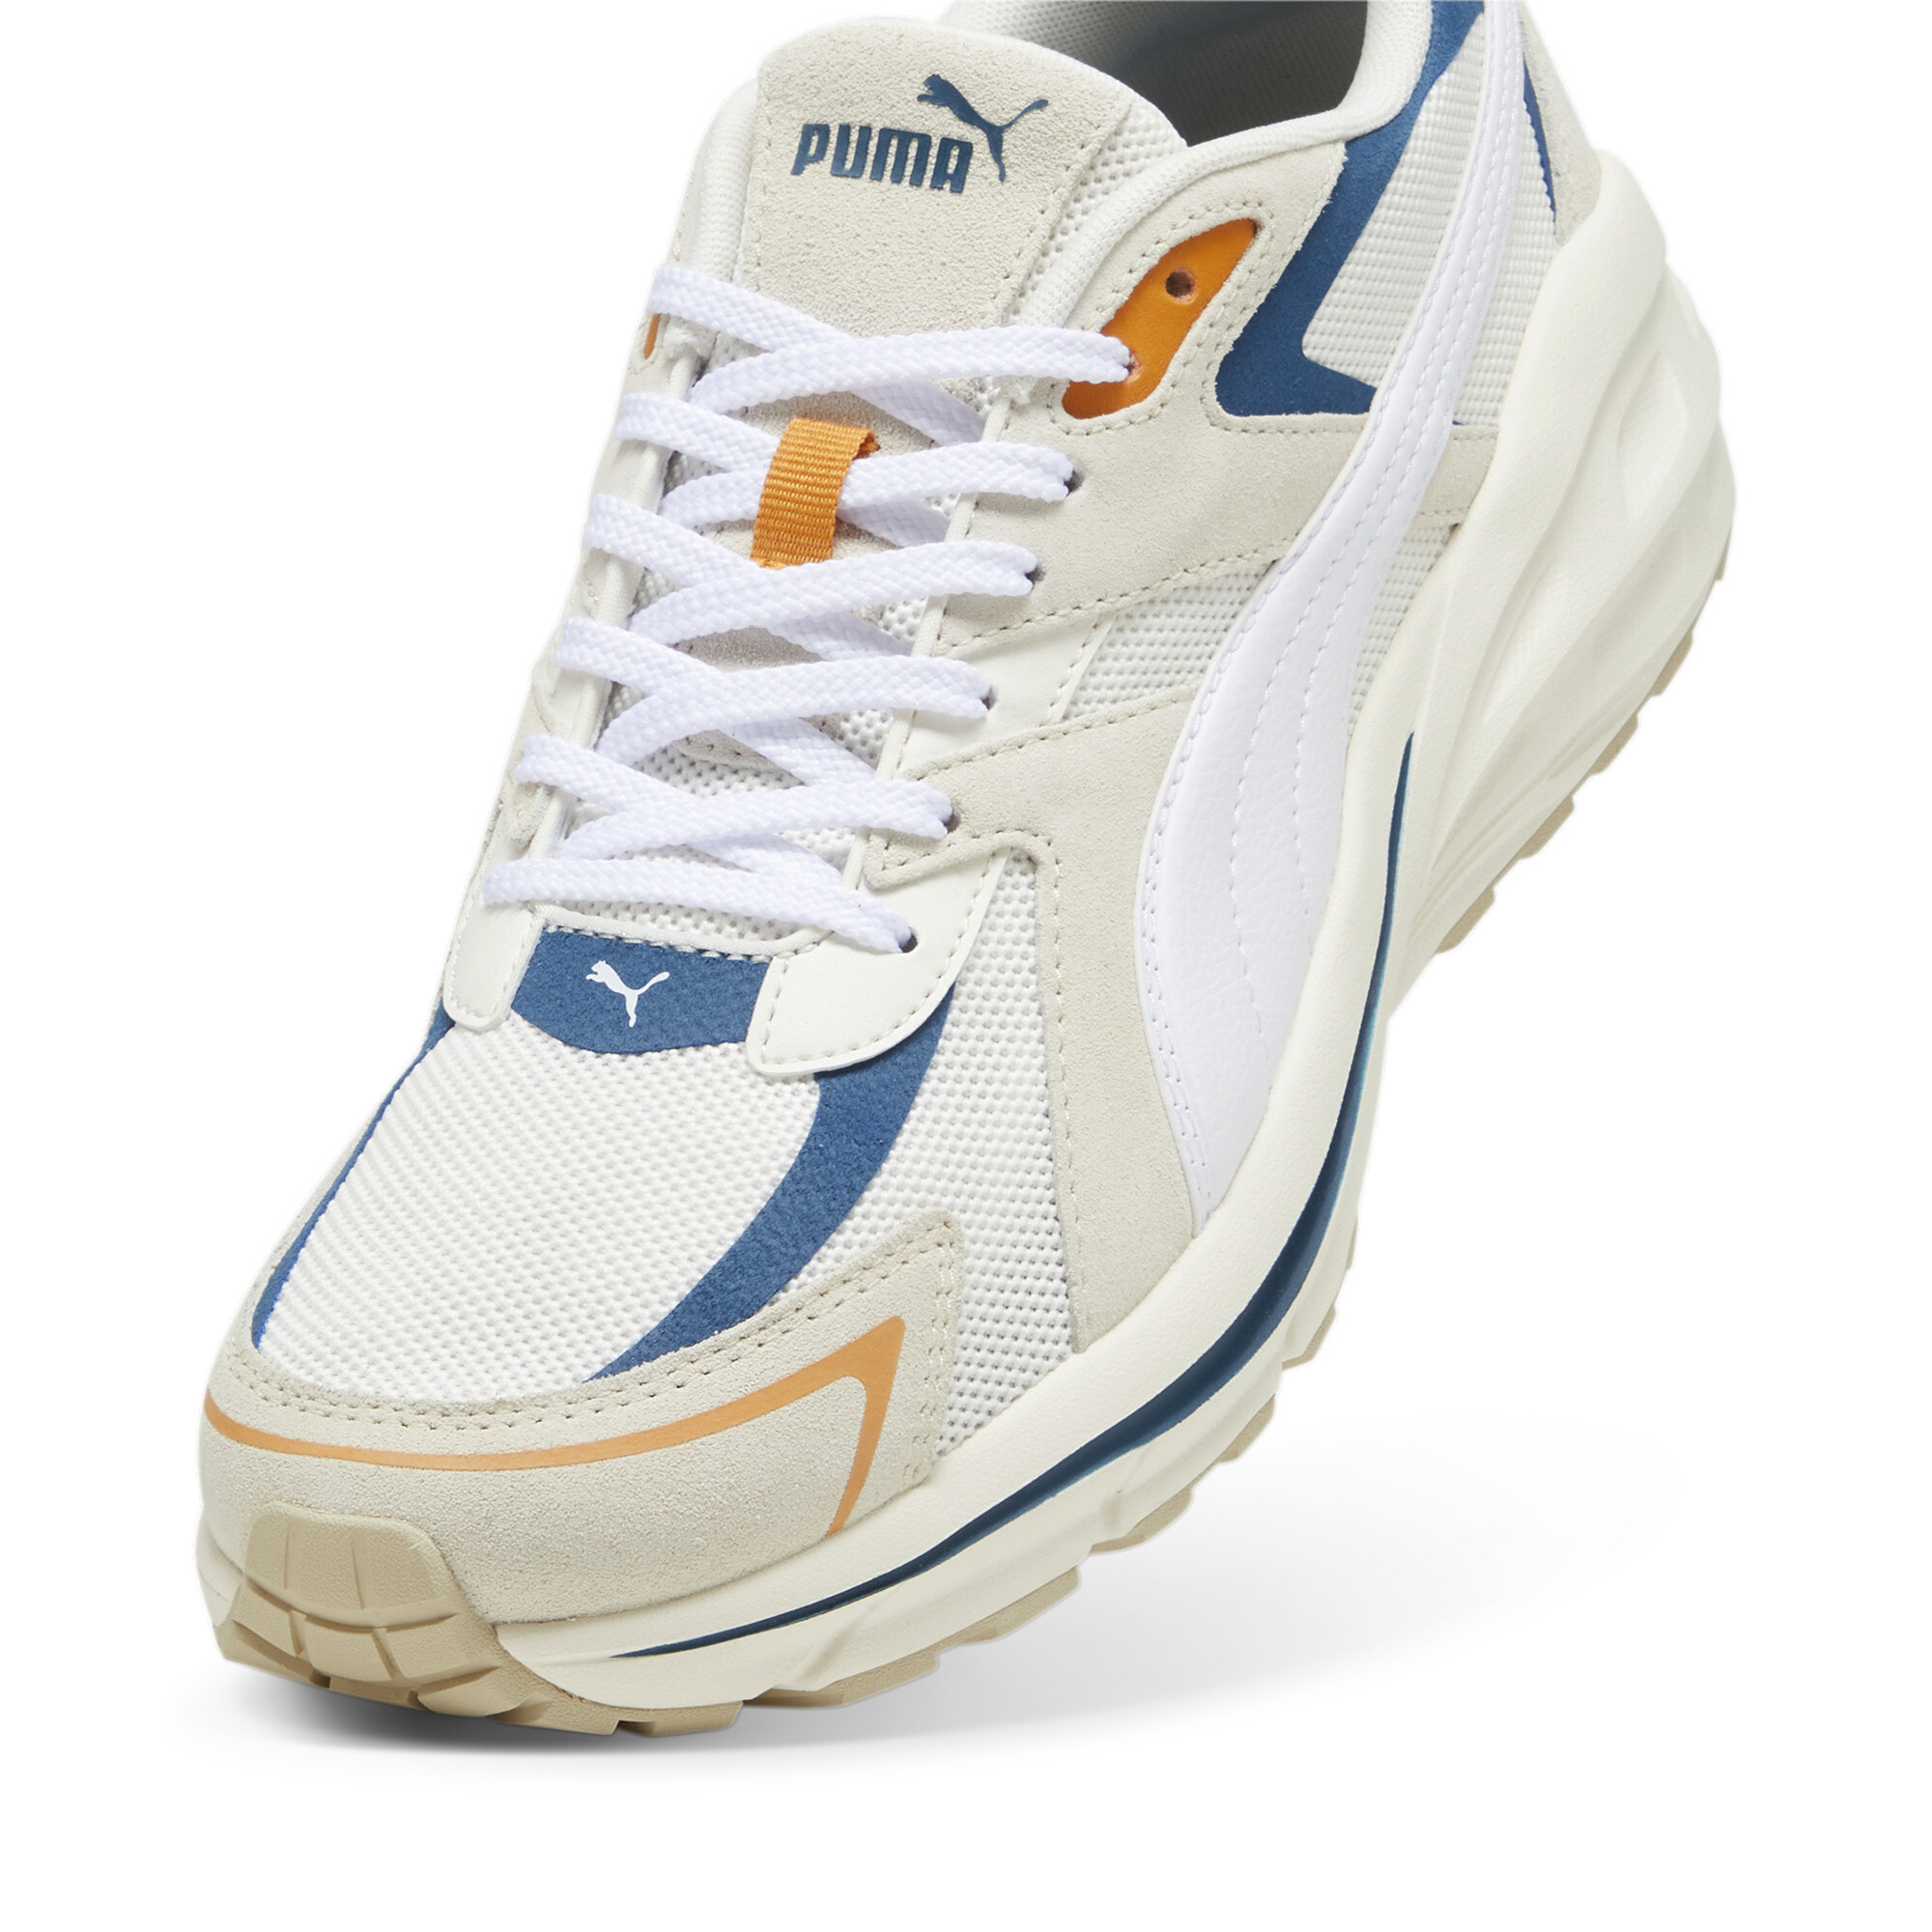 Puma Hypnotic LS Sneakers, White, Size 38, Shoes